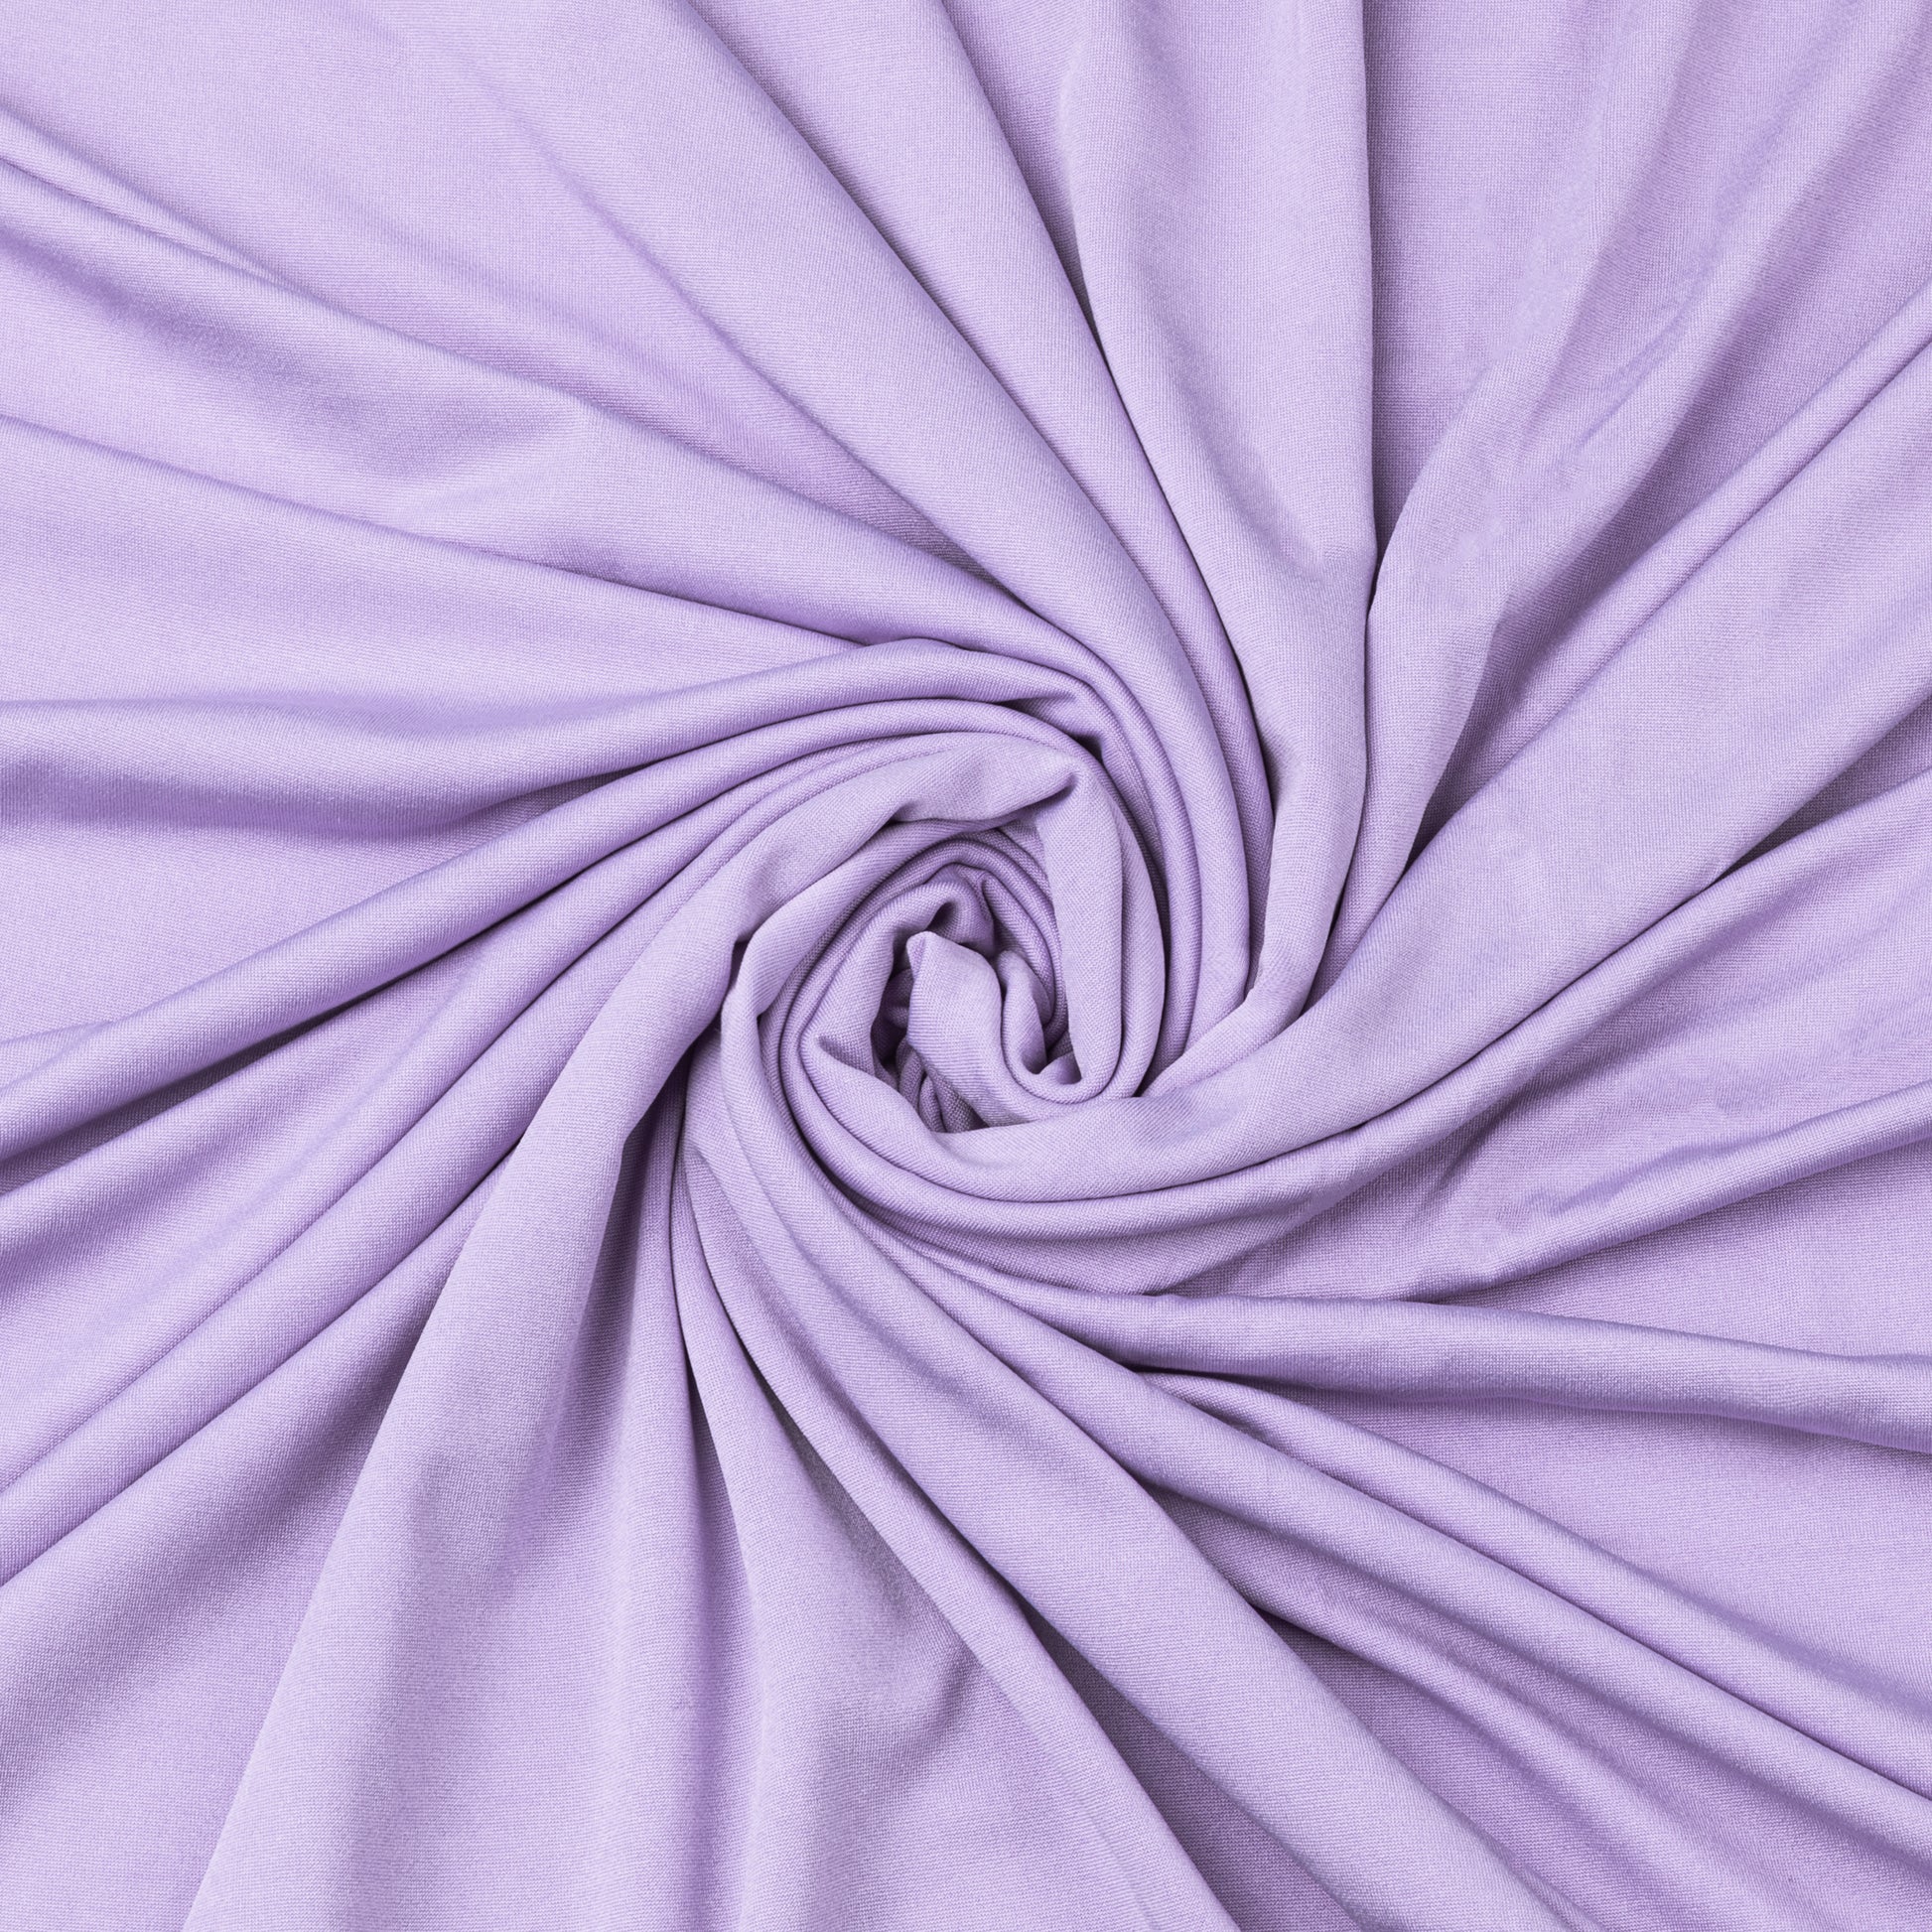 Lycra Fabrics - Properties, Uses, and Care Tips